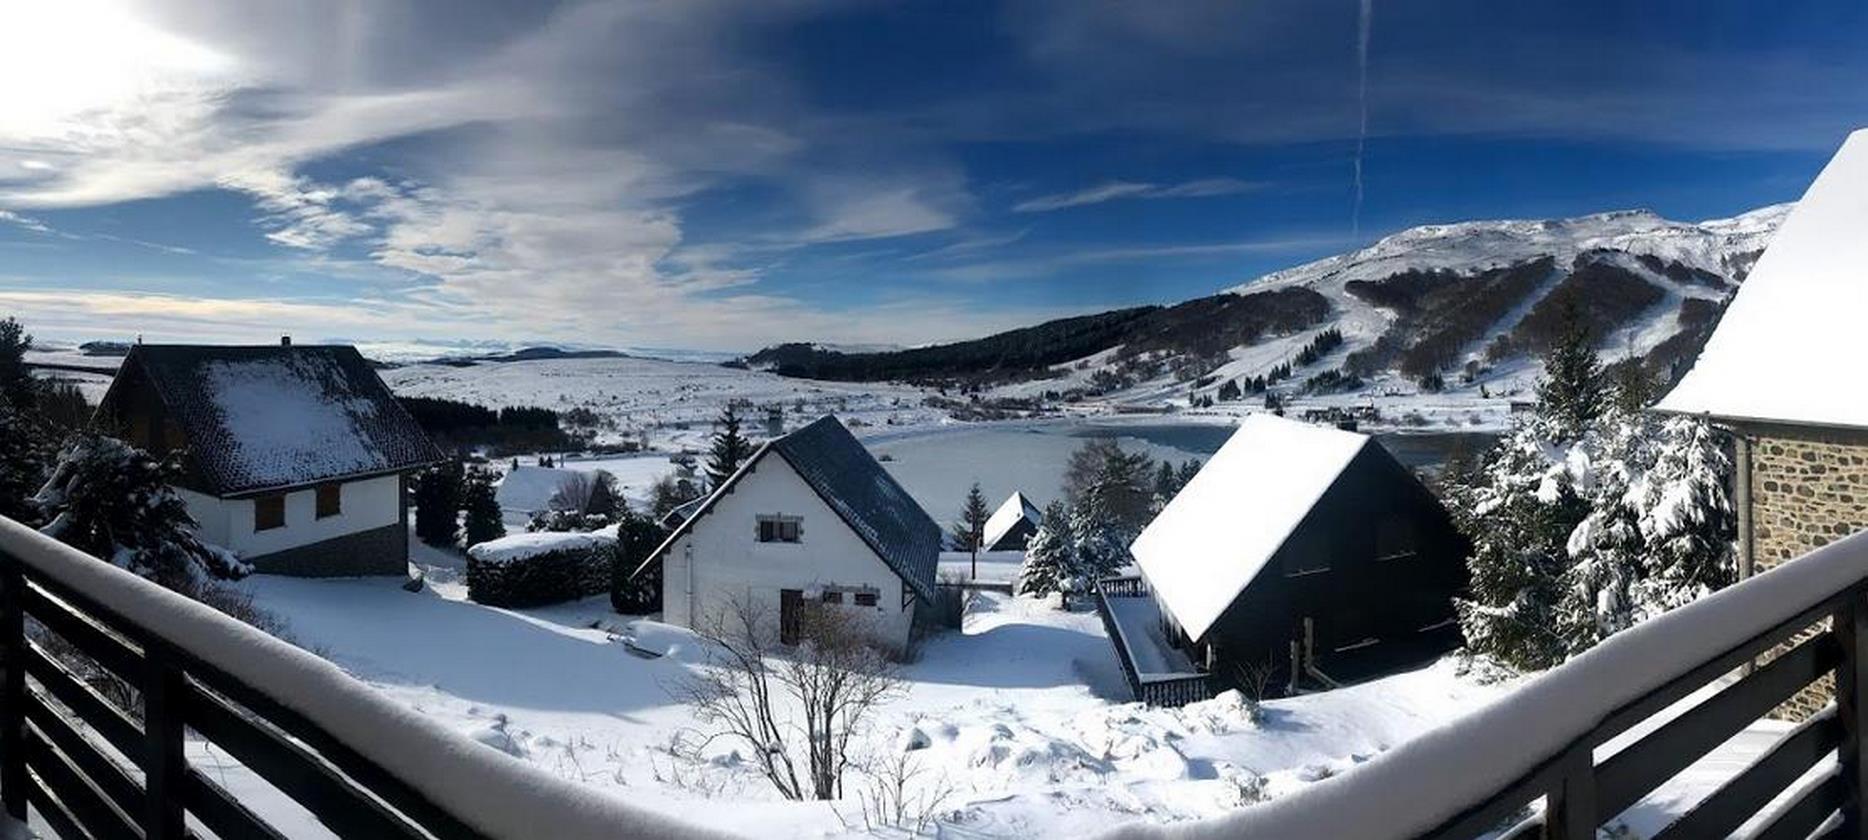 Chalet Super Besse - beautiful view from the balcony of the chalet on the Lac des Hermines and the ski slopes